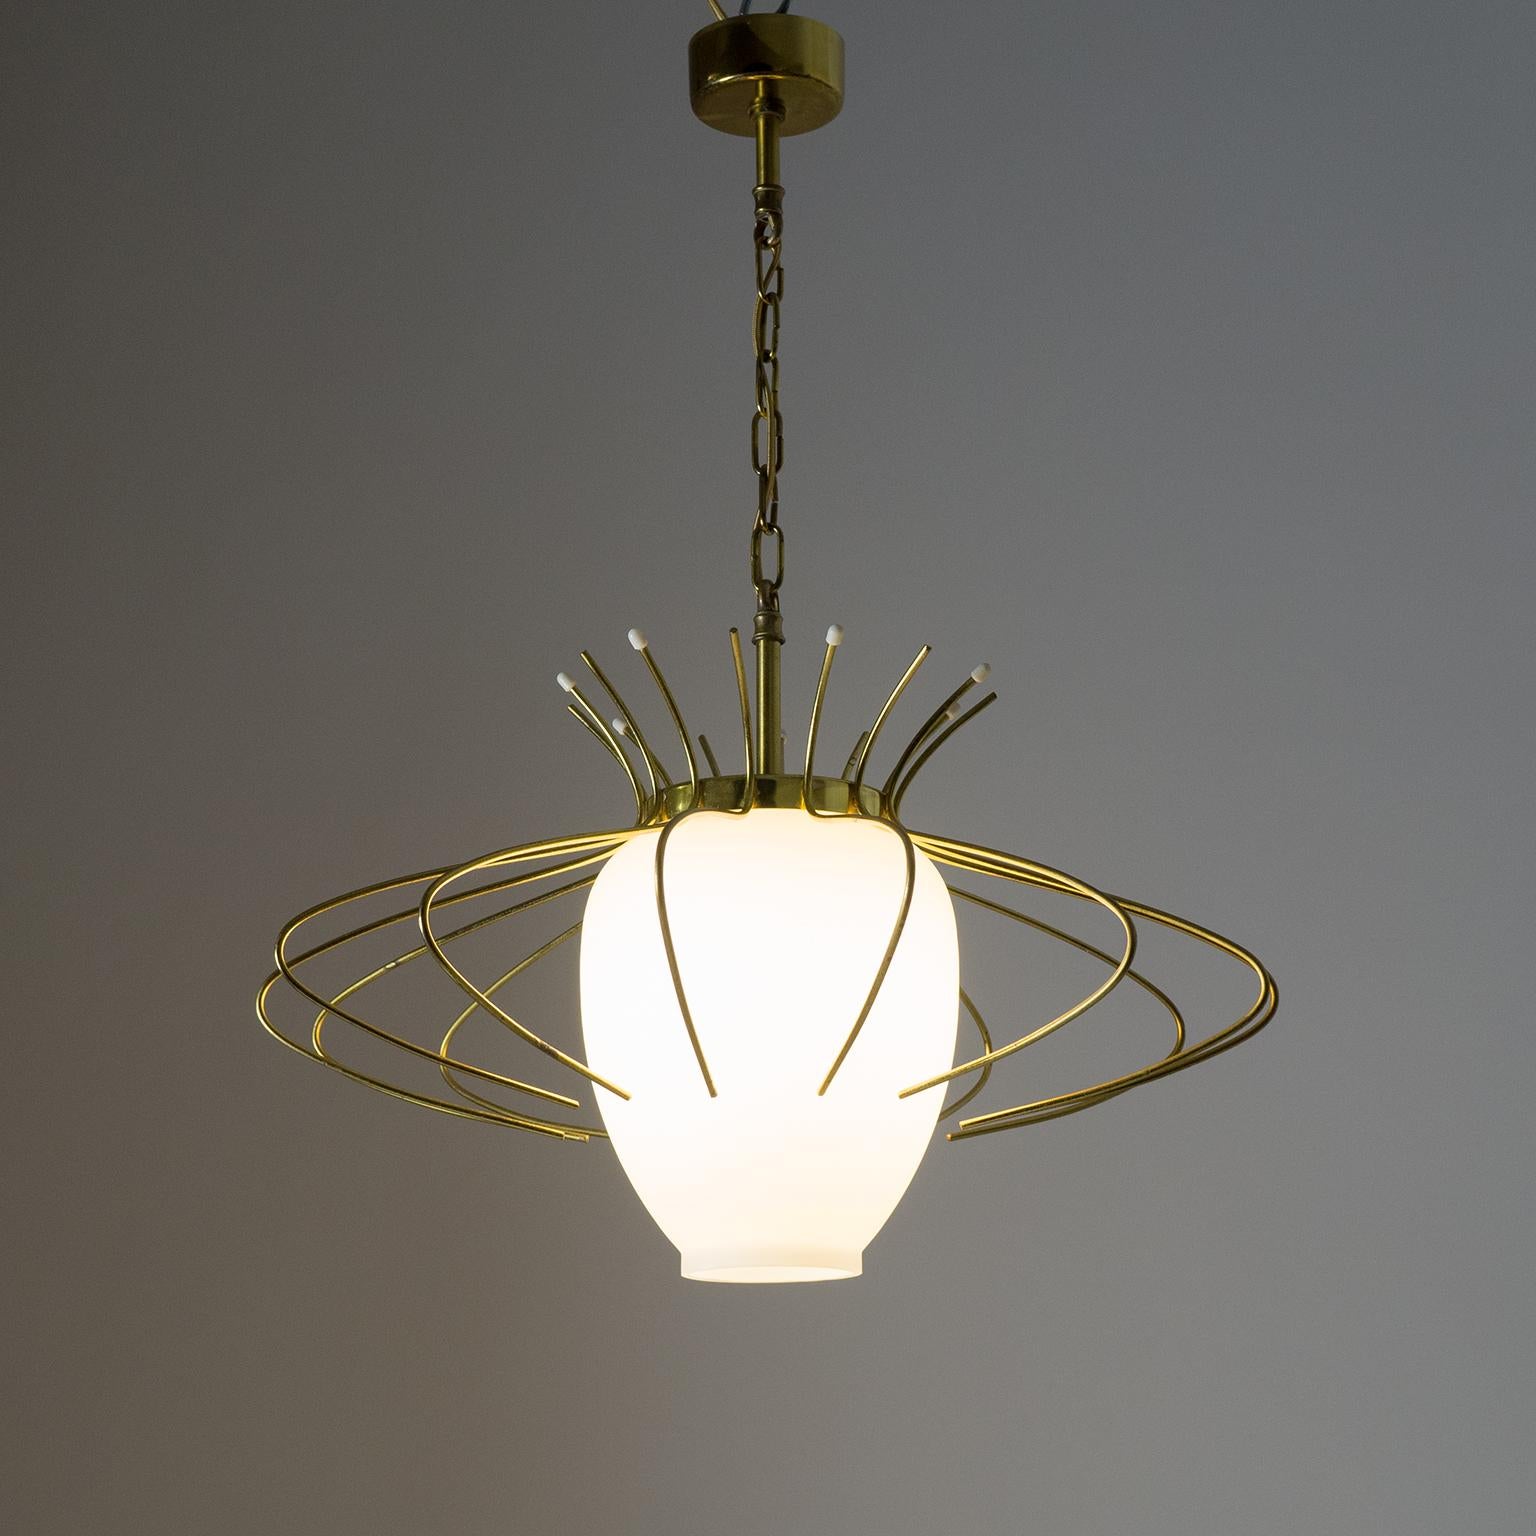 Frosted French Modernist Pendant, 1960s, Brass and Satin Glass